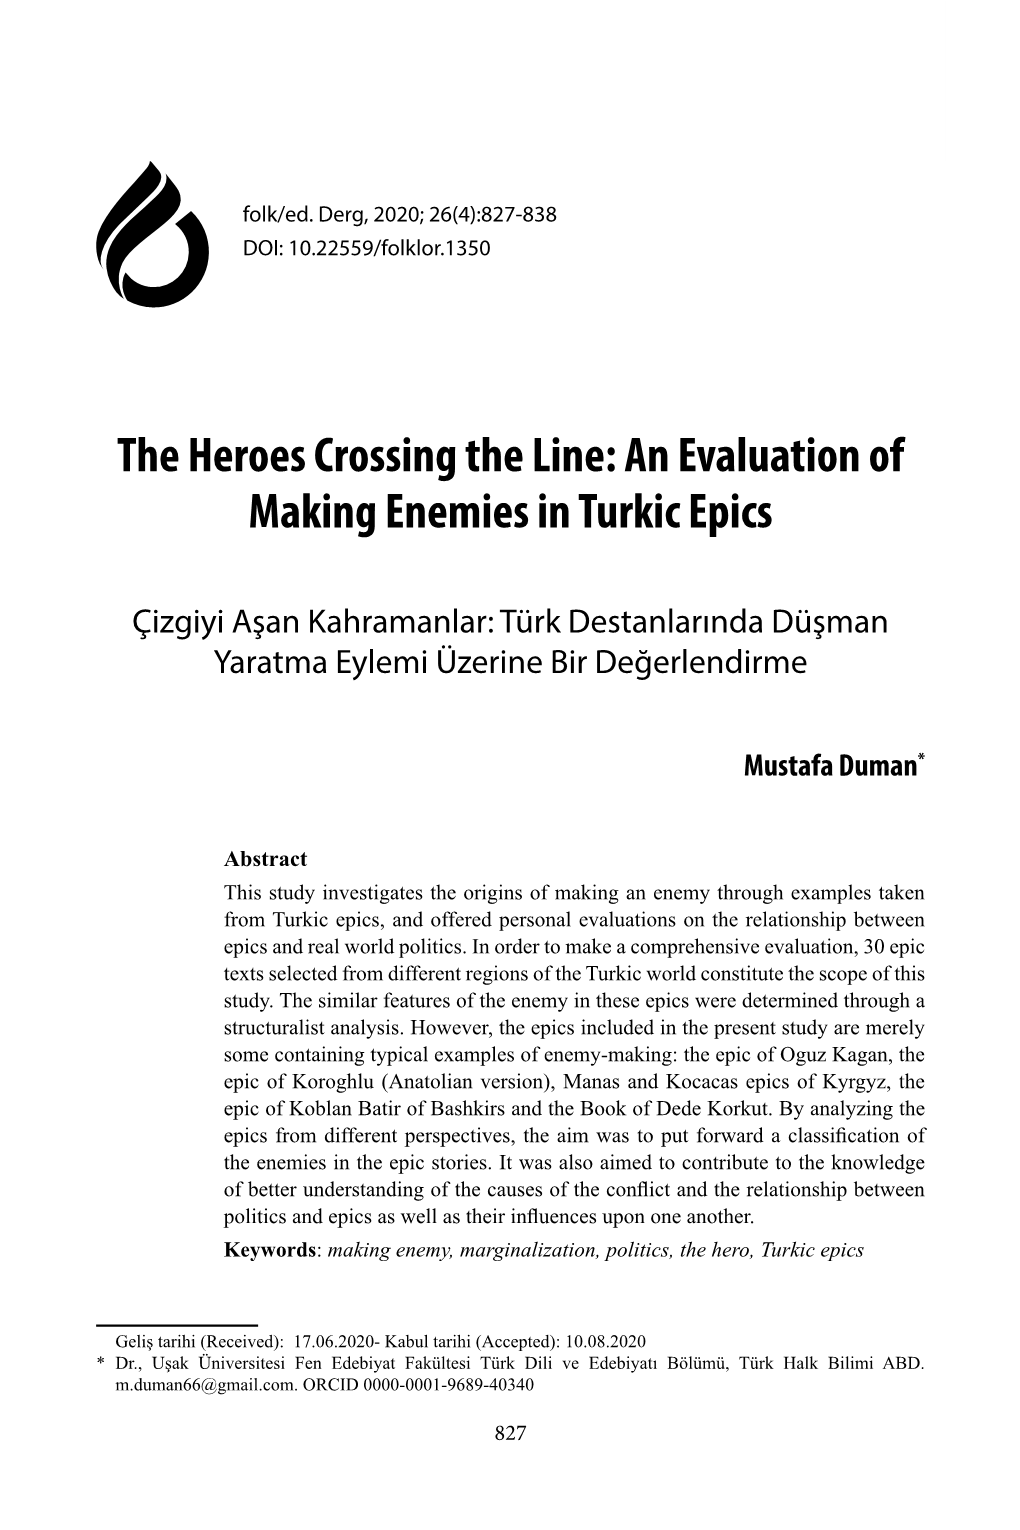 The Heroes Crossing the Line: an Evaluation of Making Enemies in Turkic Epics